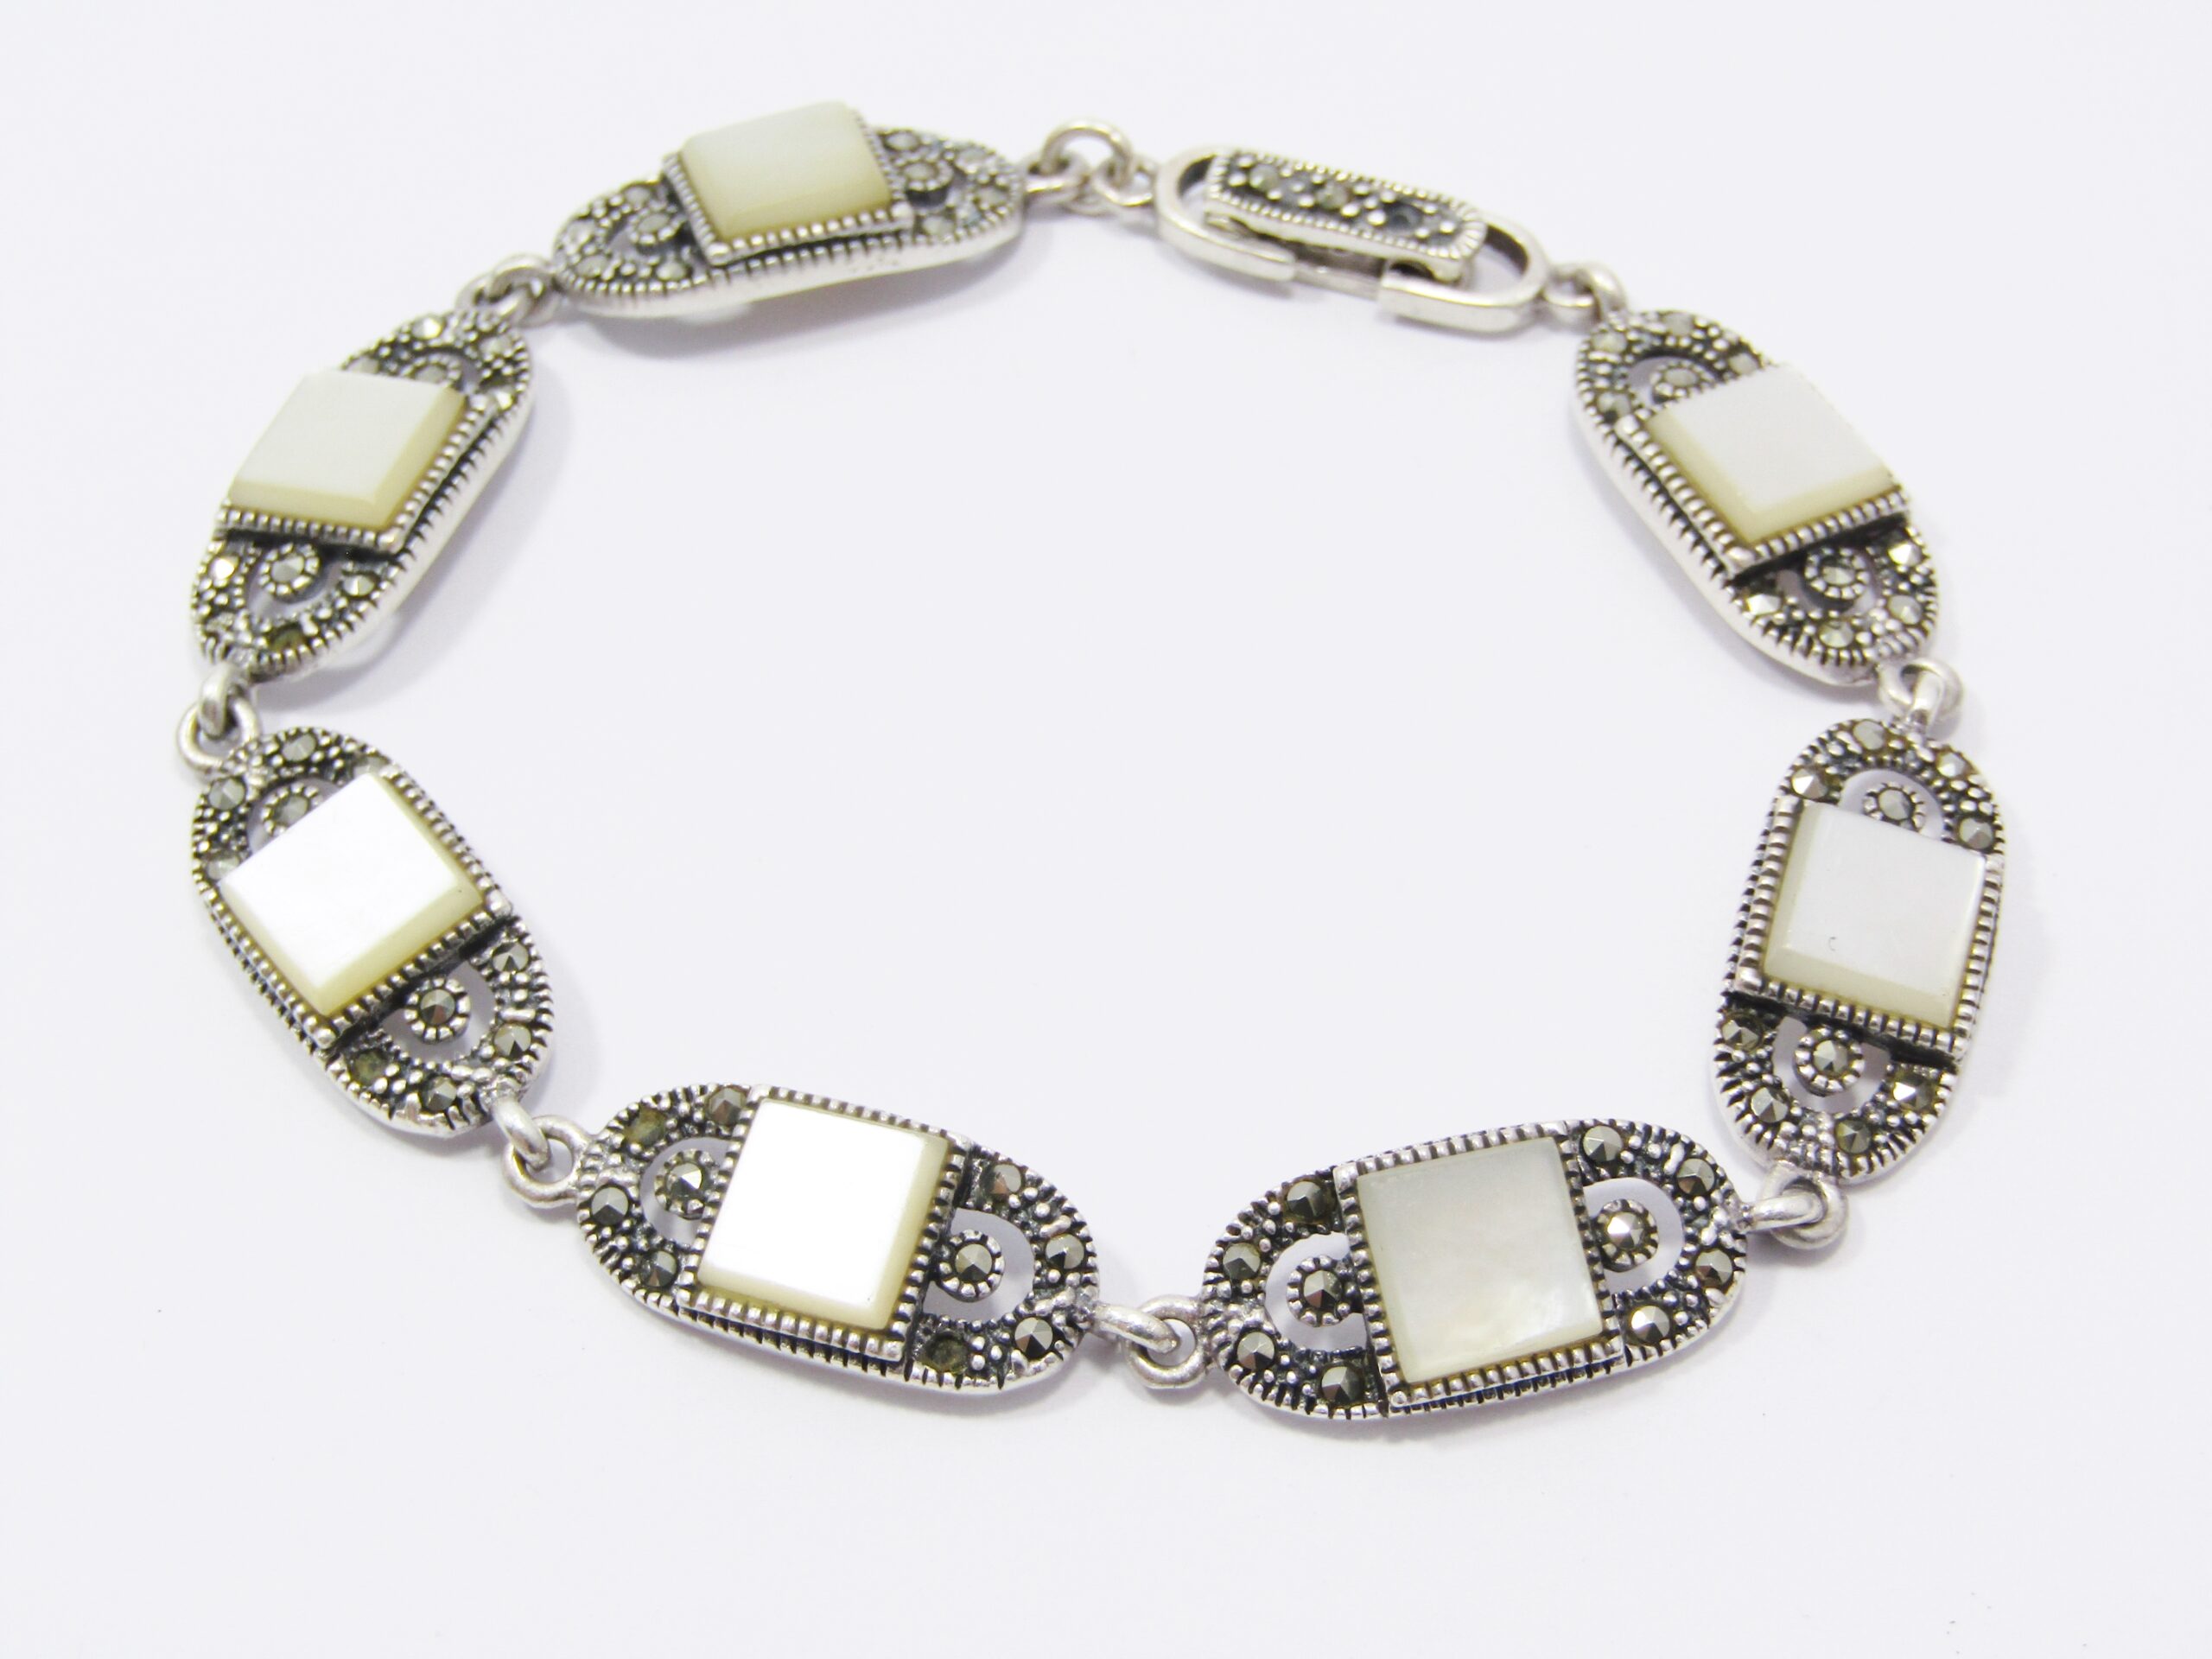 A Lovely Mother of Pearl and Marcasite Bracelet in Sterling Silver.